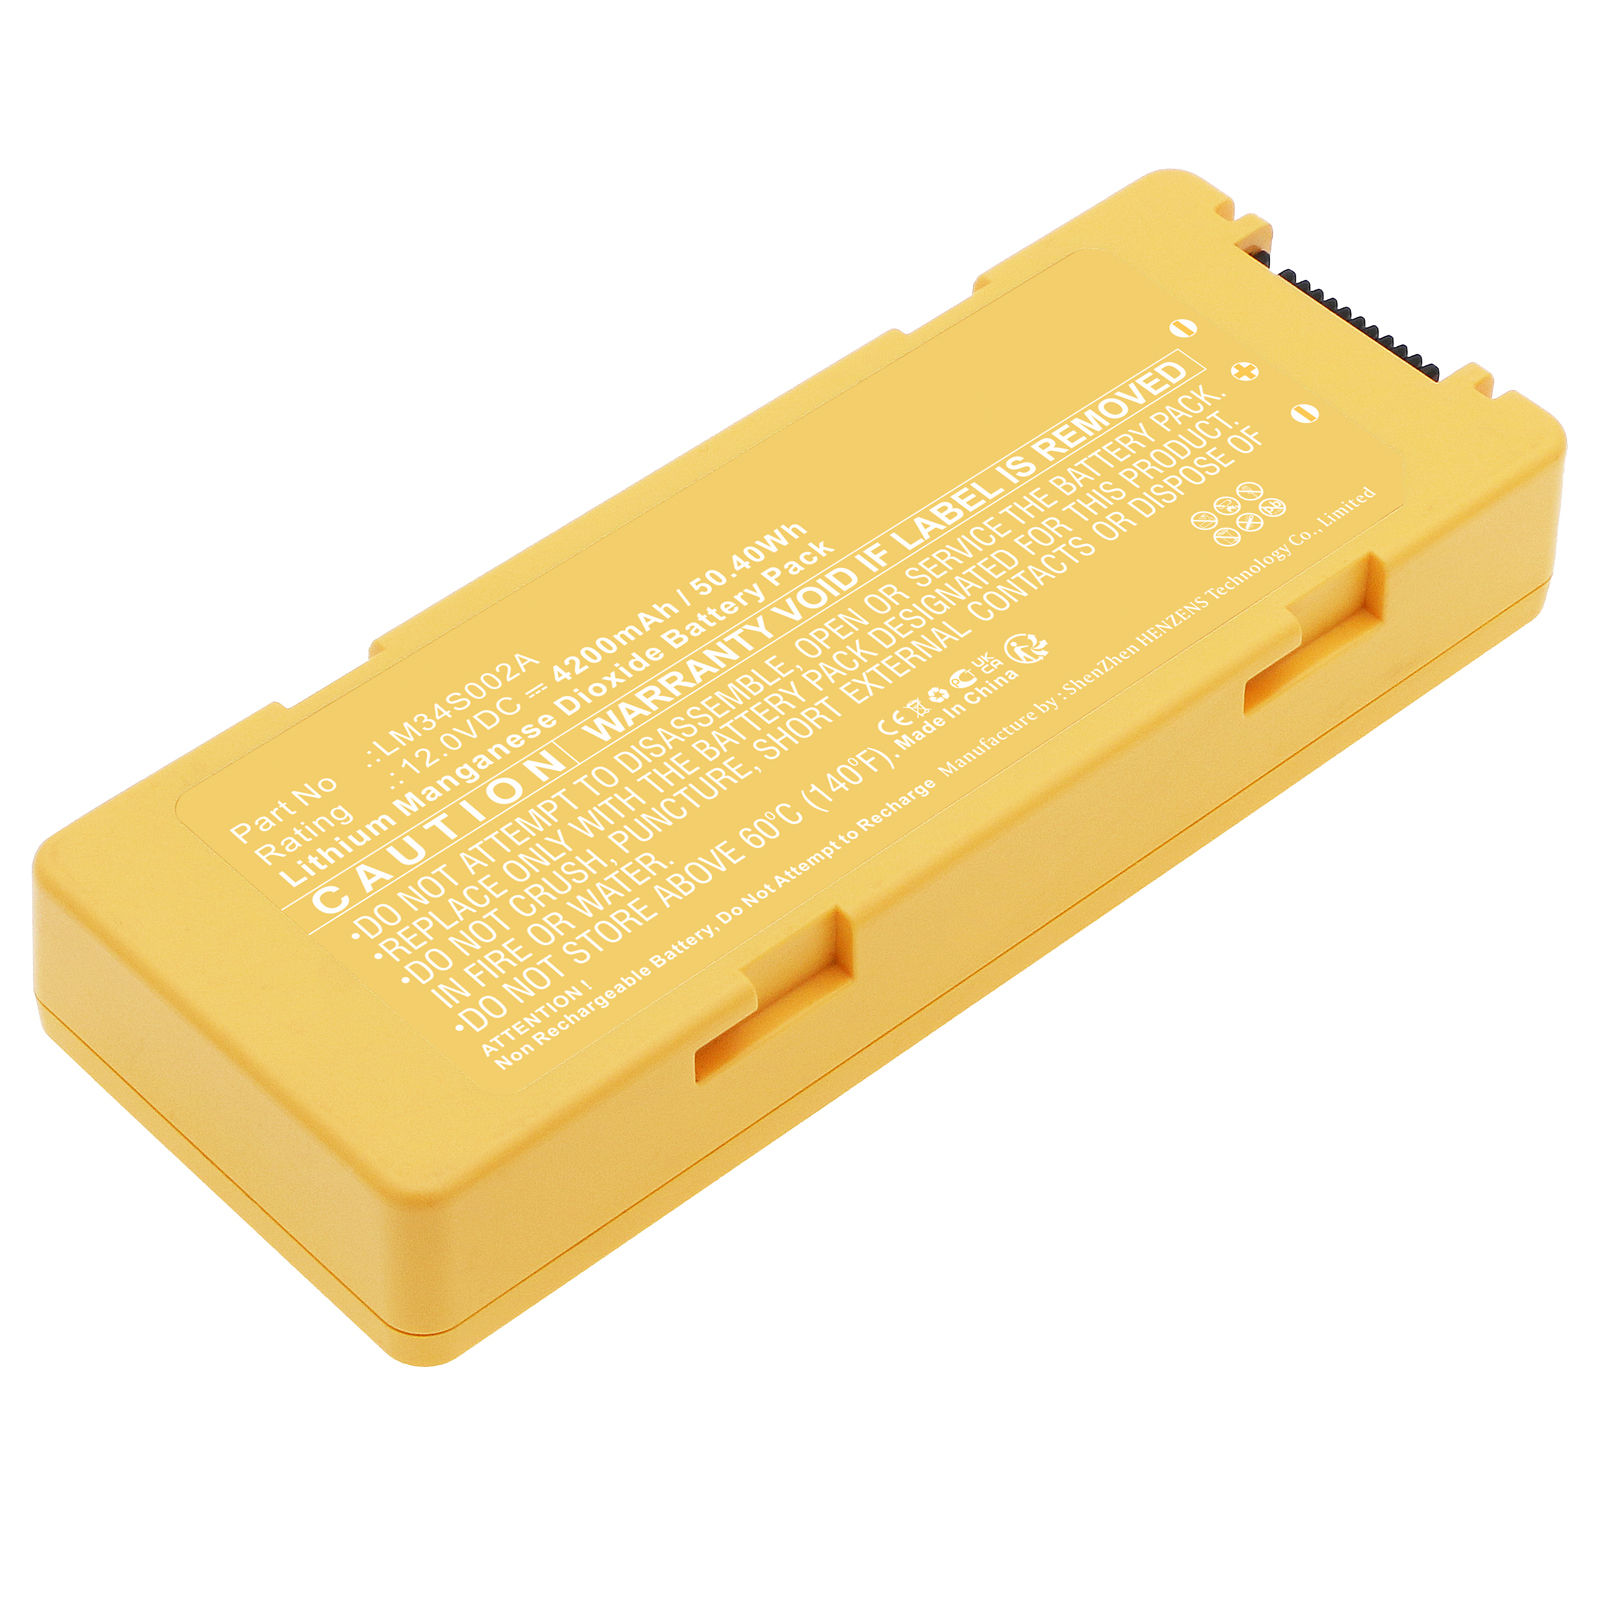 Synergy Digital Medical Battery, Compatible with Mindray LM34S002A Medical Battery (Li-MnO2, 12V, 4200mAh)